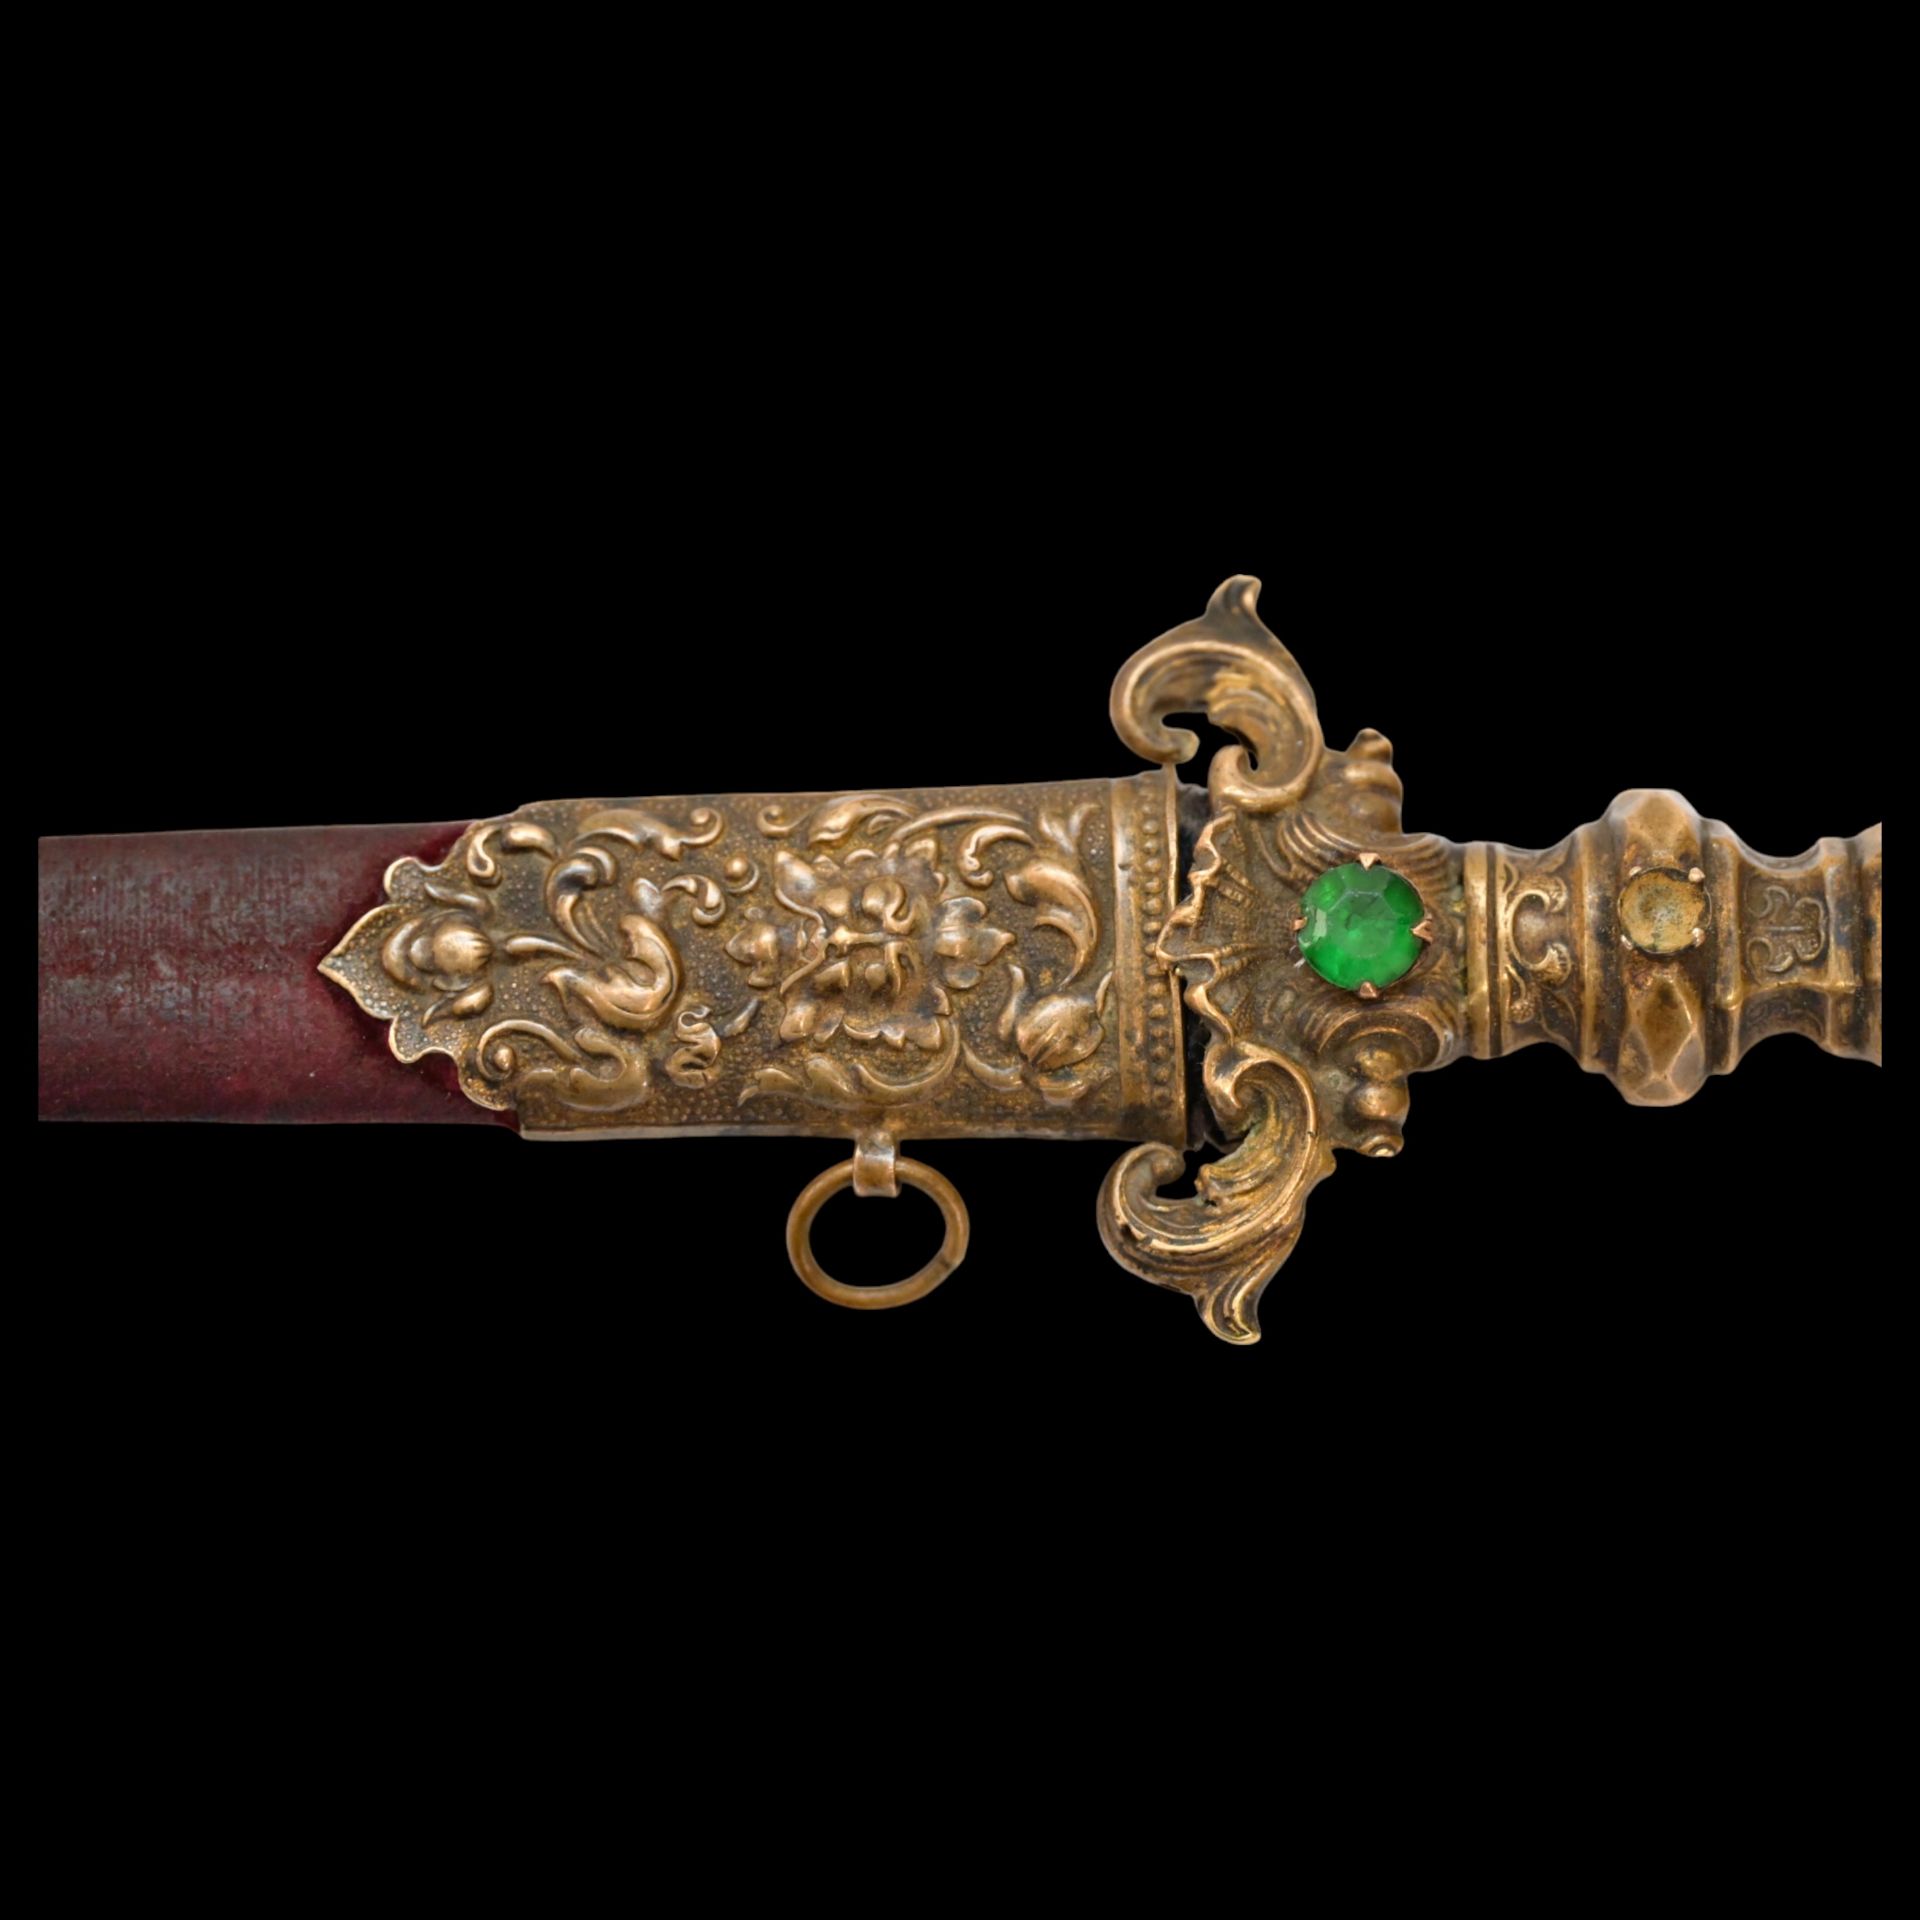 A Very high quality Dagger Renaissance Style Brass with inlaid colored stones, 19th century. - Image 4 of 9